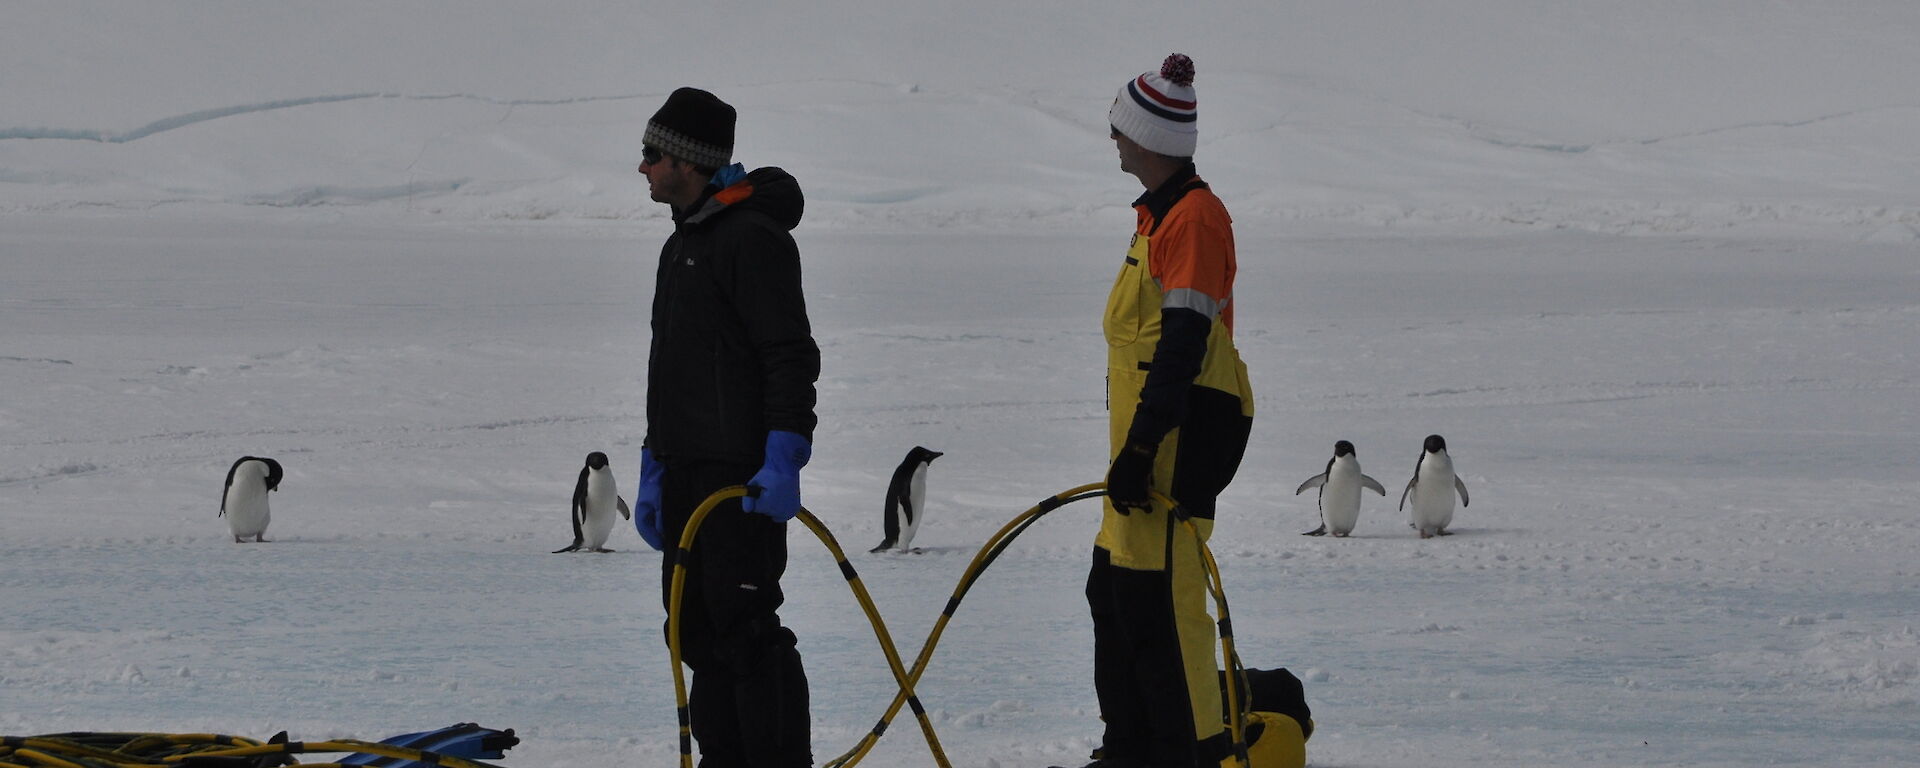 Two dive supervisors on the ice monitoring a diver with curious penguins in background